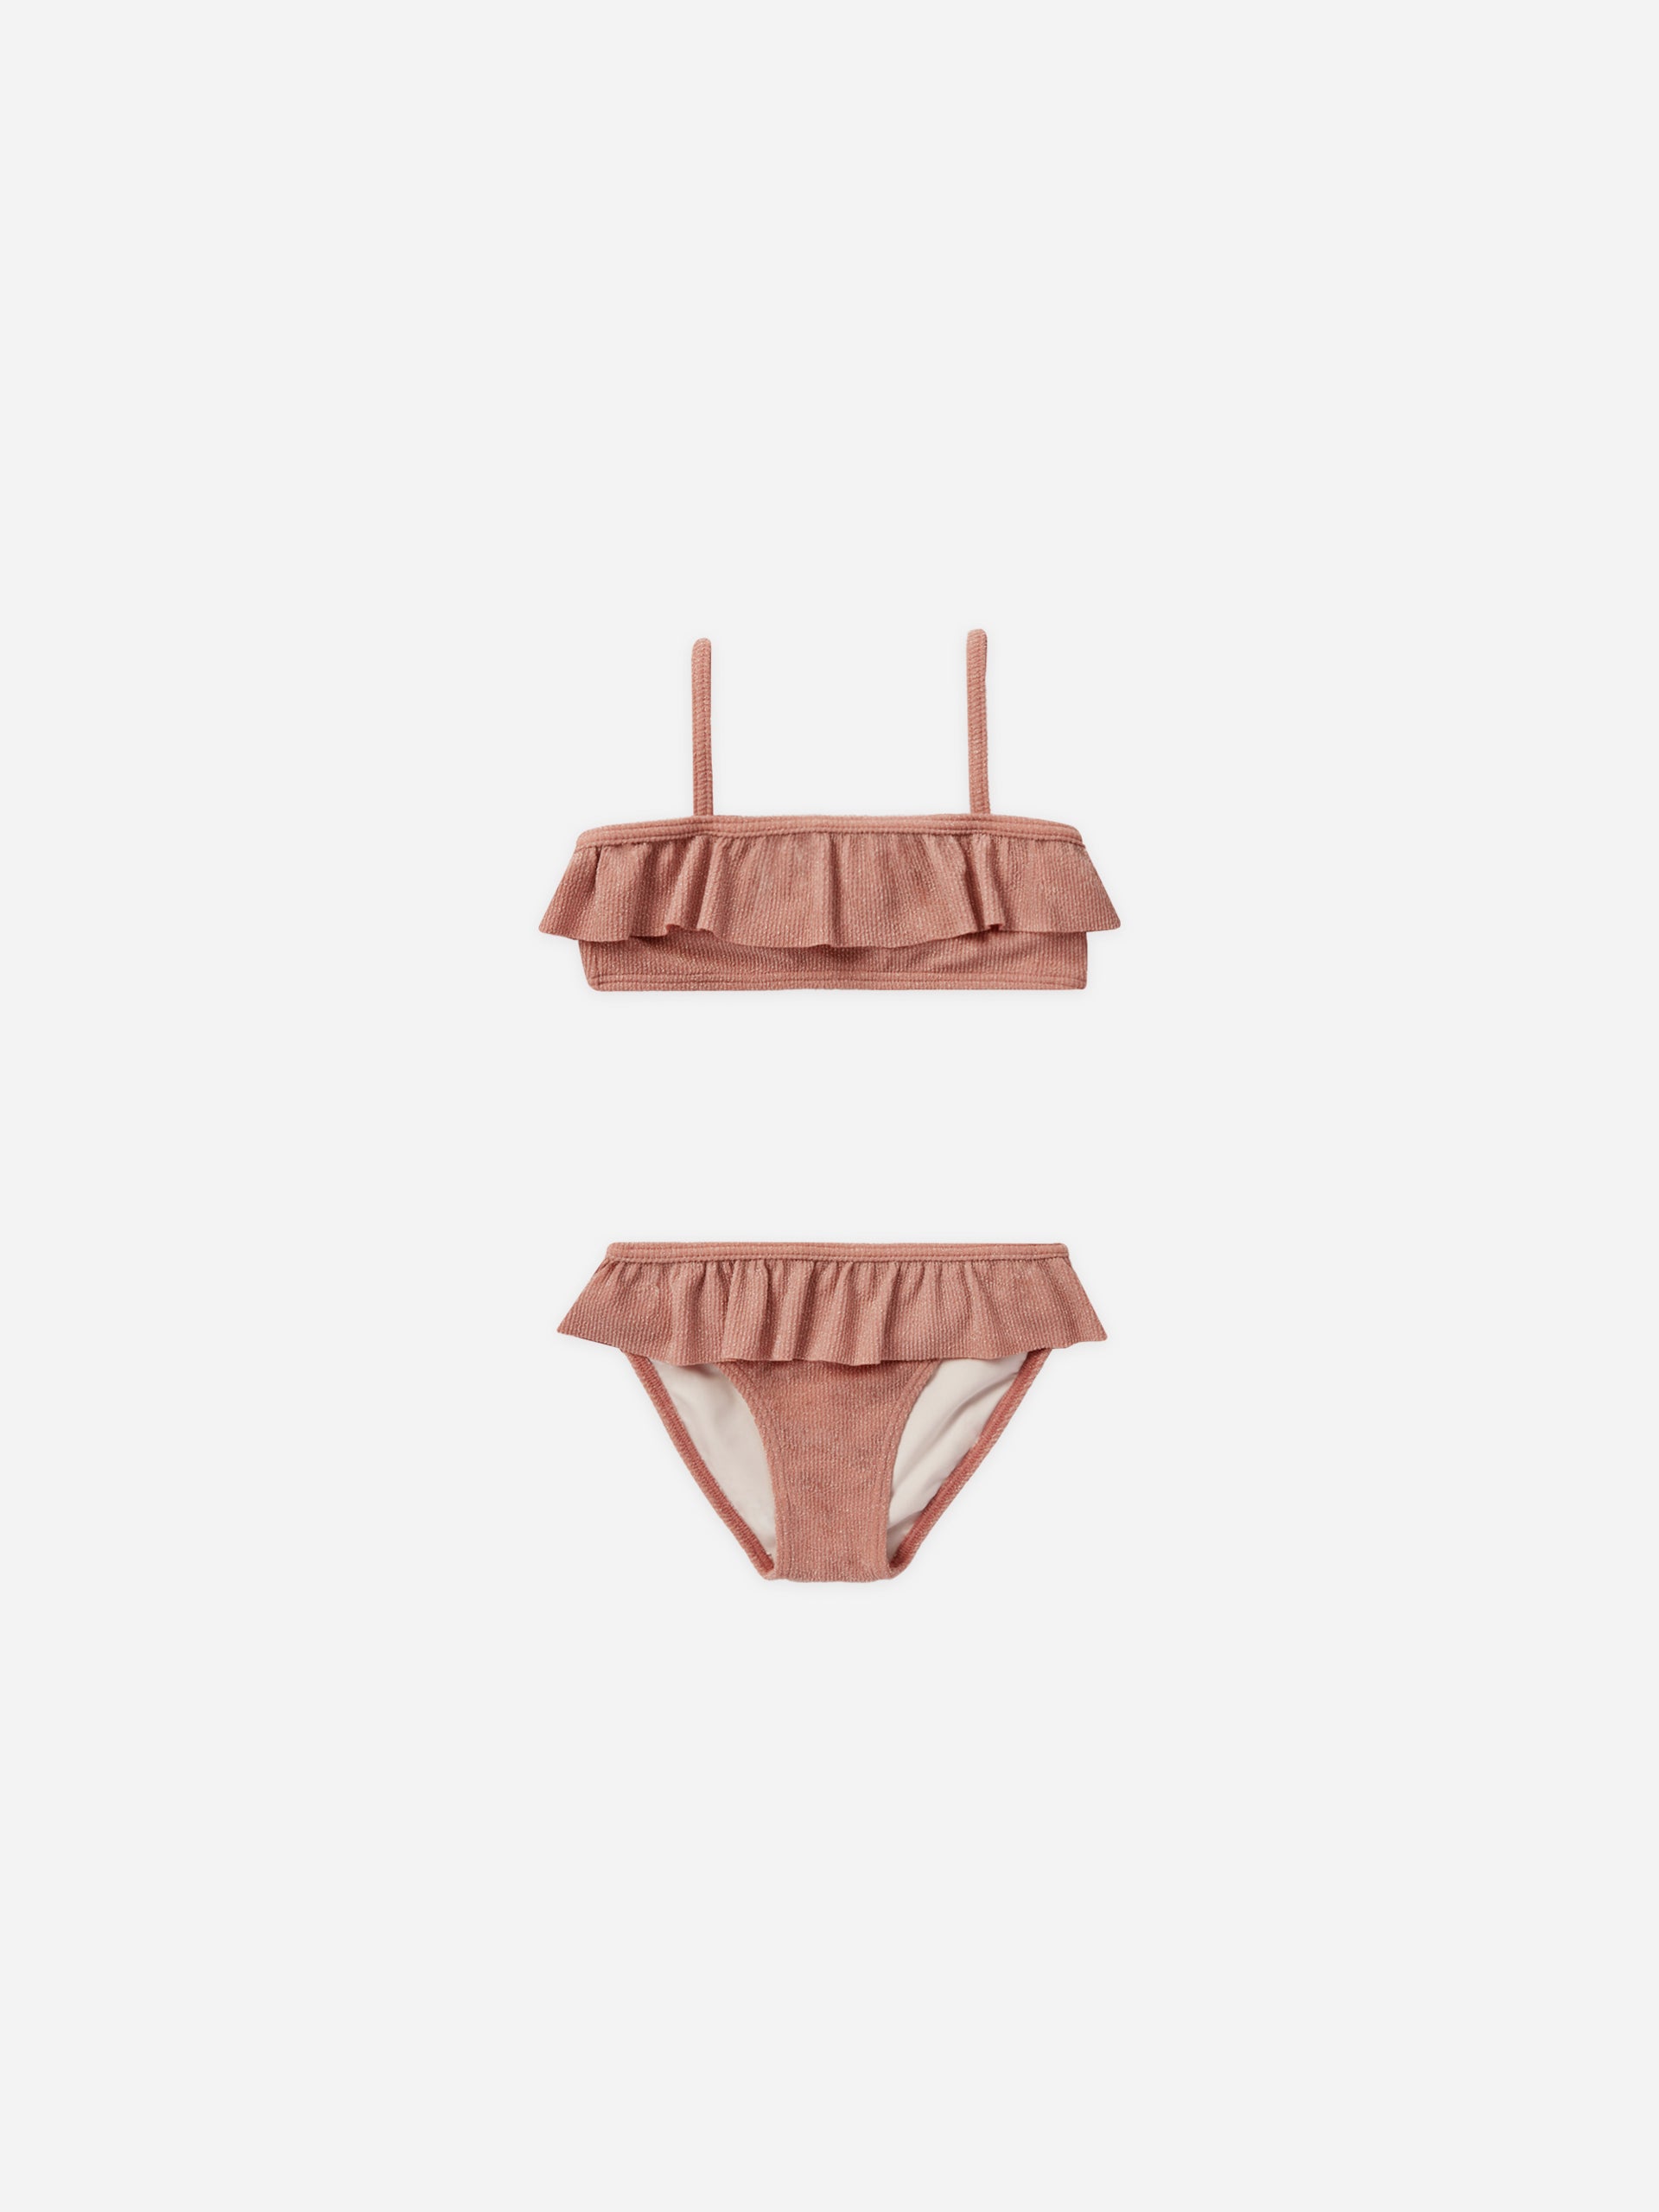 Parker Bikini || Lipstick - Rylee + Cru | Kids Clothes | Trendy Baby Clothes | Modern Infant Outfits |